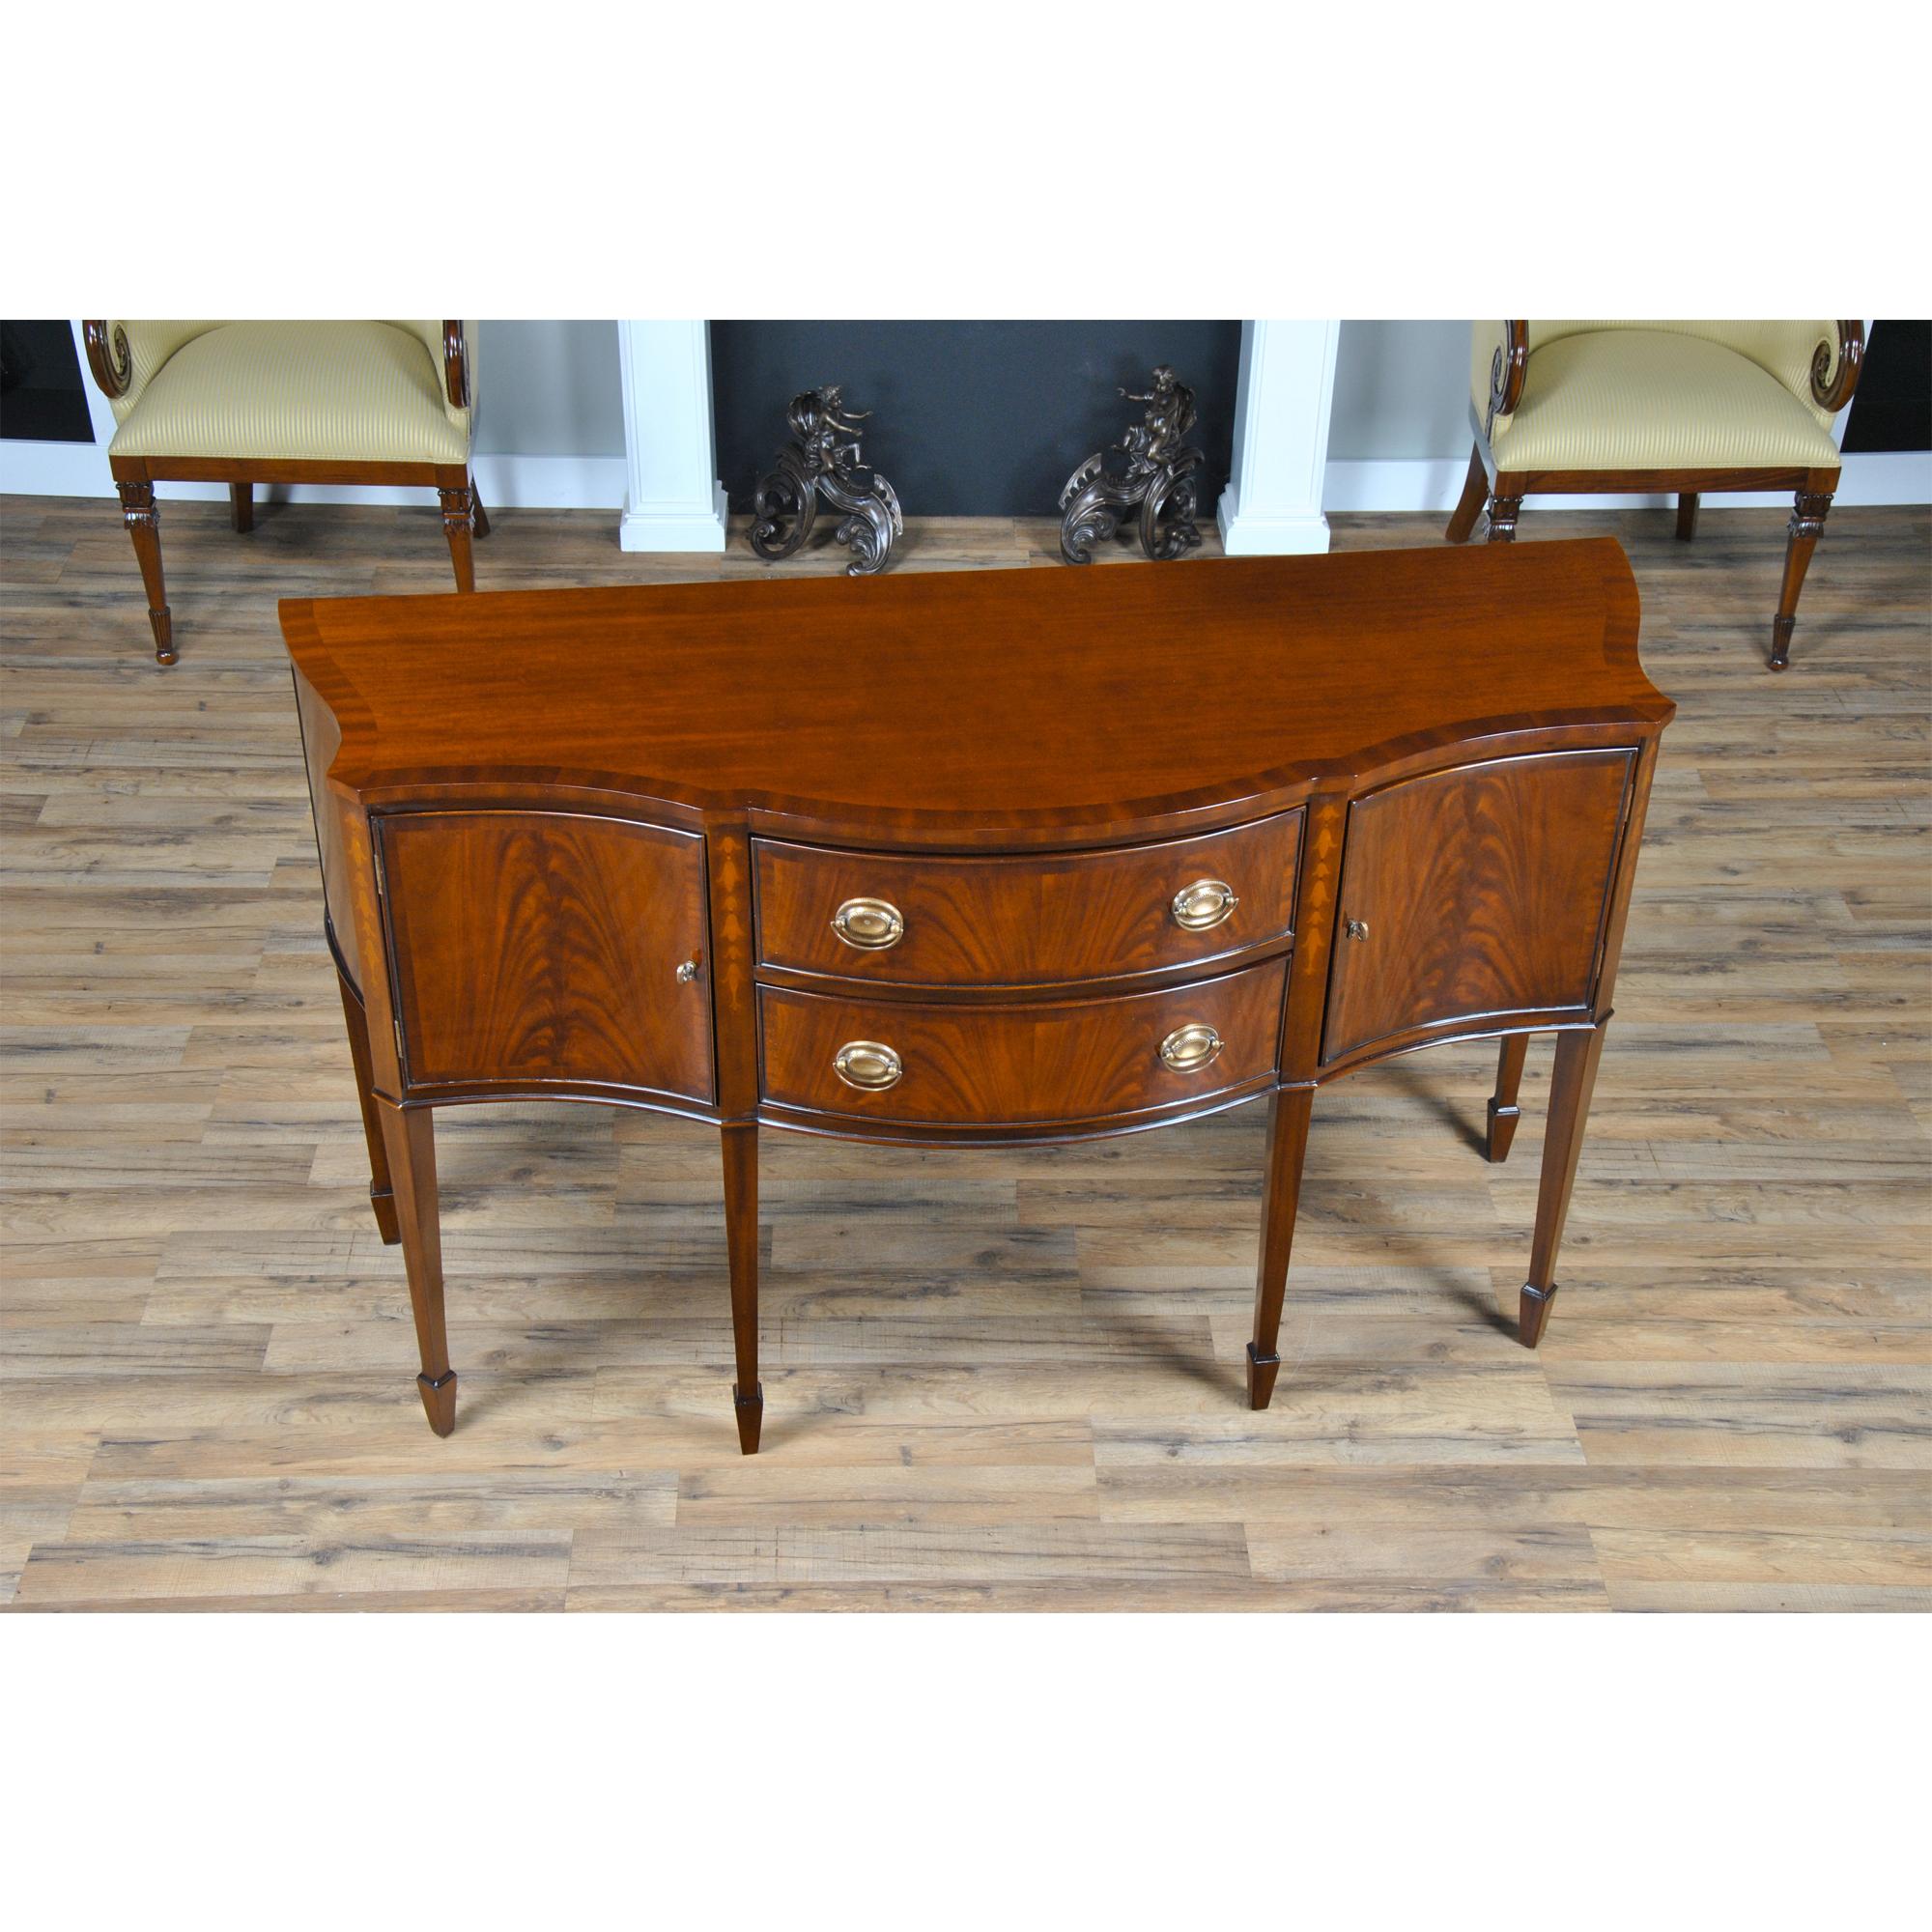 This sophisticated Inlaid Sideboard is beautifully appointed throughout and also boasts practical storage space. The serpentine shaped front is a classic design feature and this shape is highlighted on the top of the sideboard with lightly